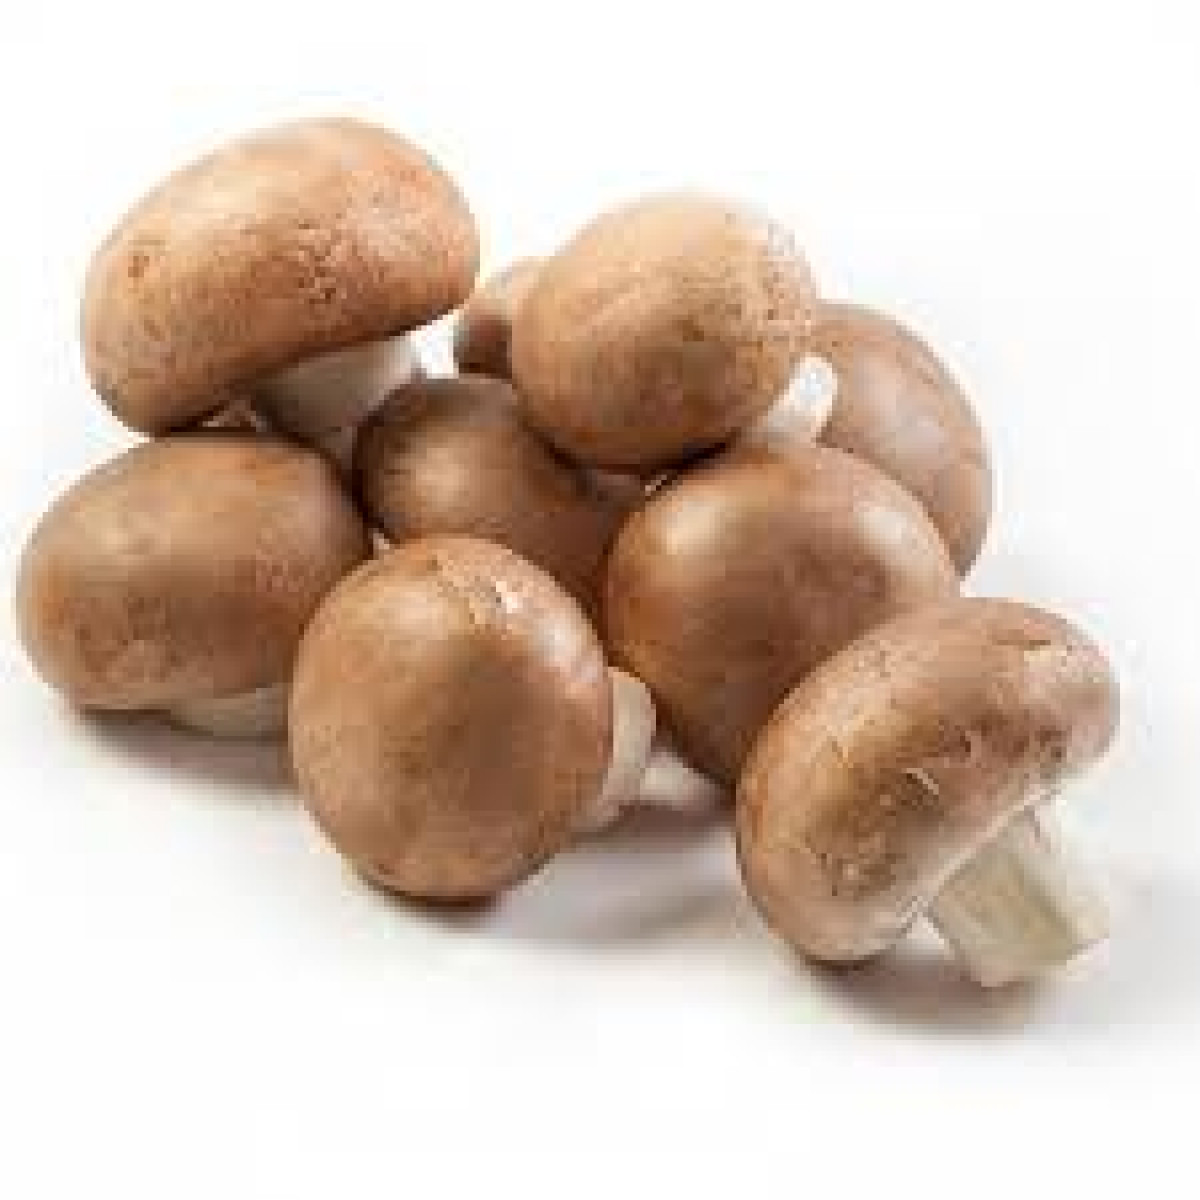 Product picture for Chestnut mushrooms